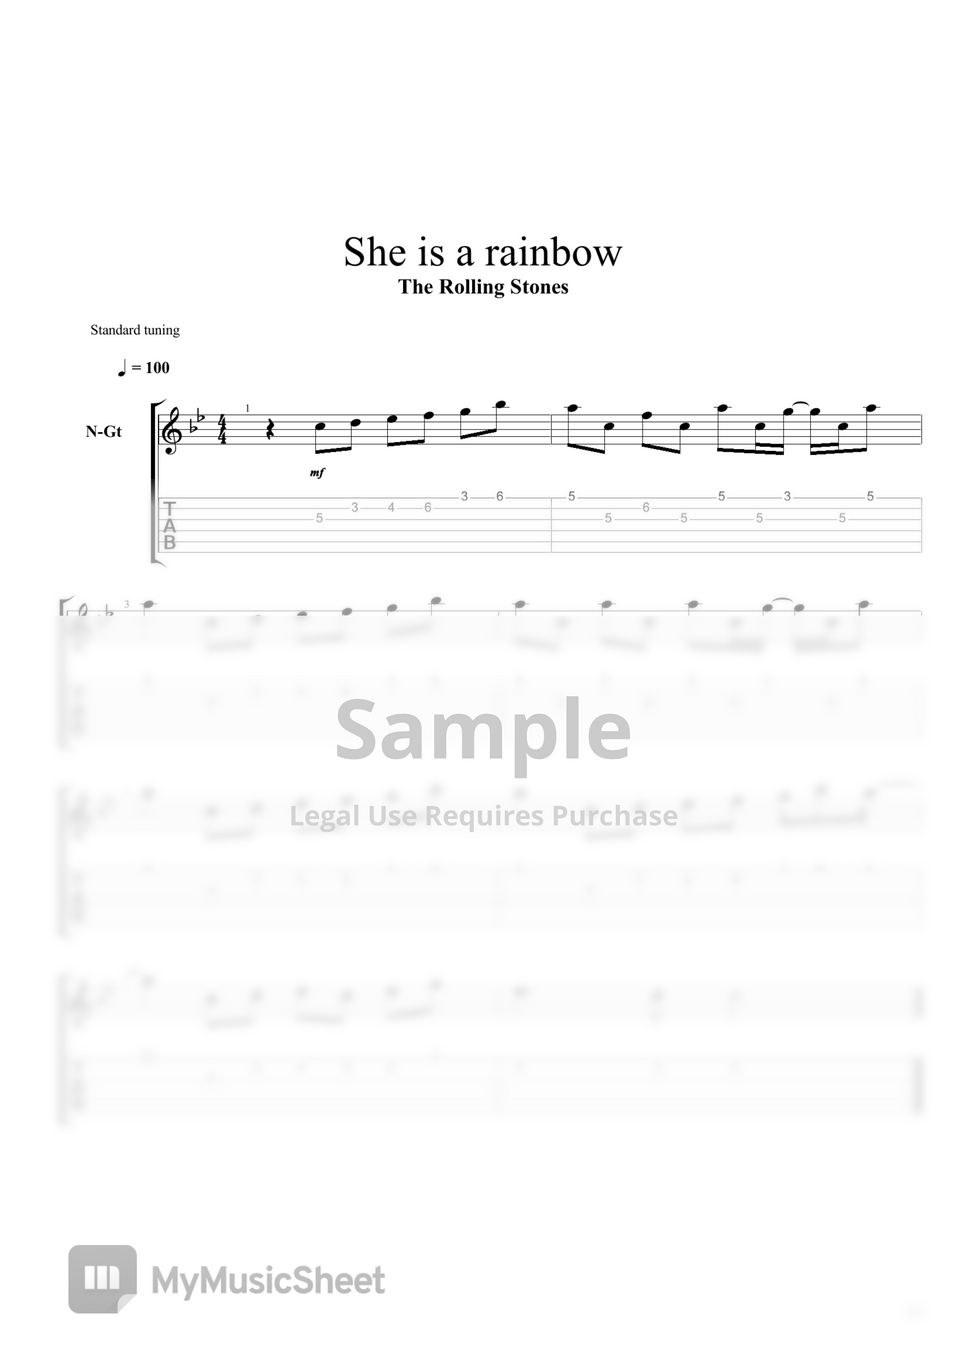 The rolling stones - She is a rainbow by Mélodie pour guitare en tablature et solfège